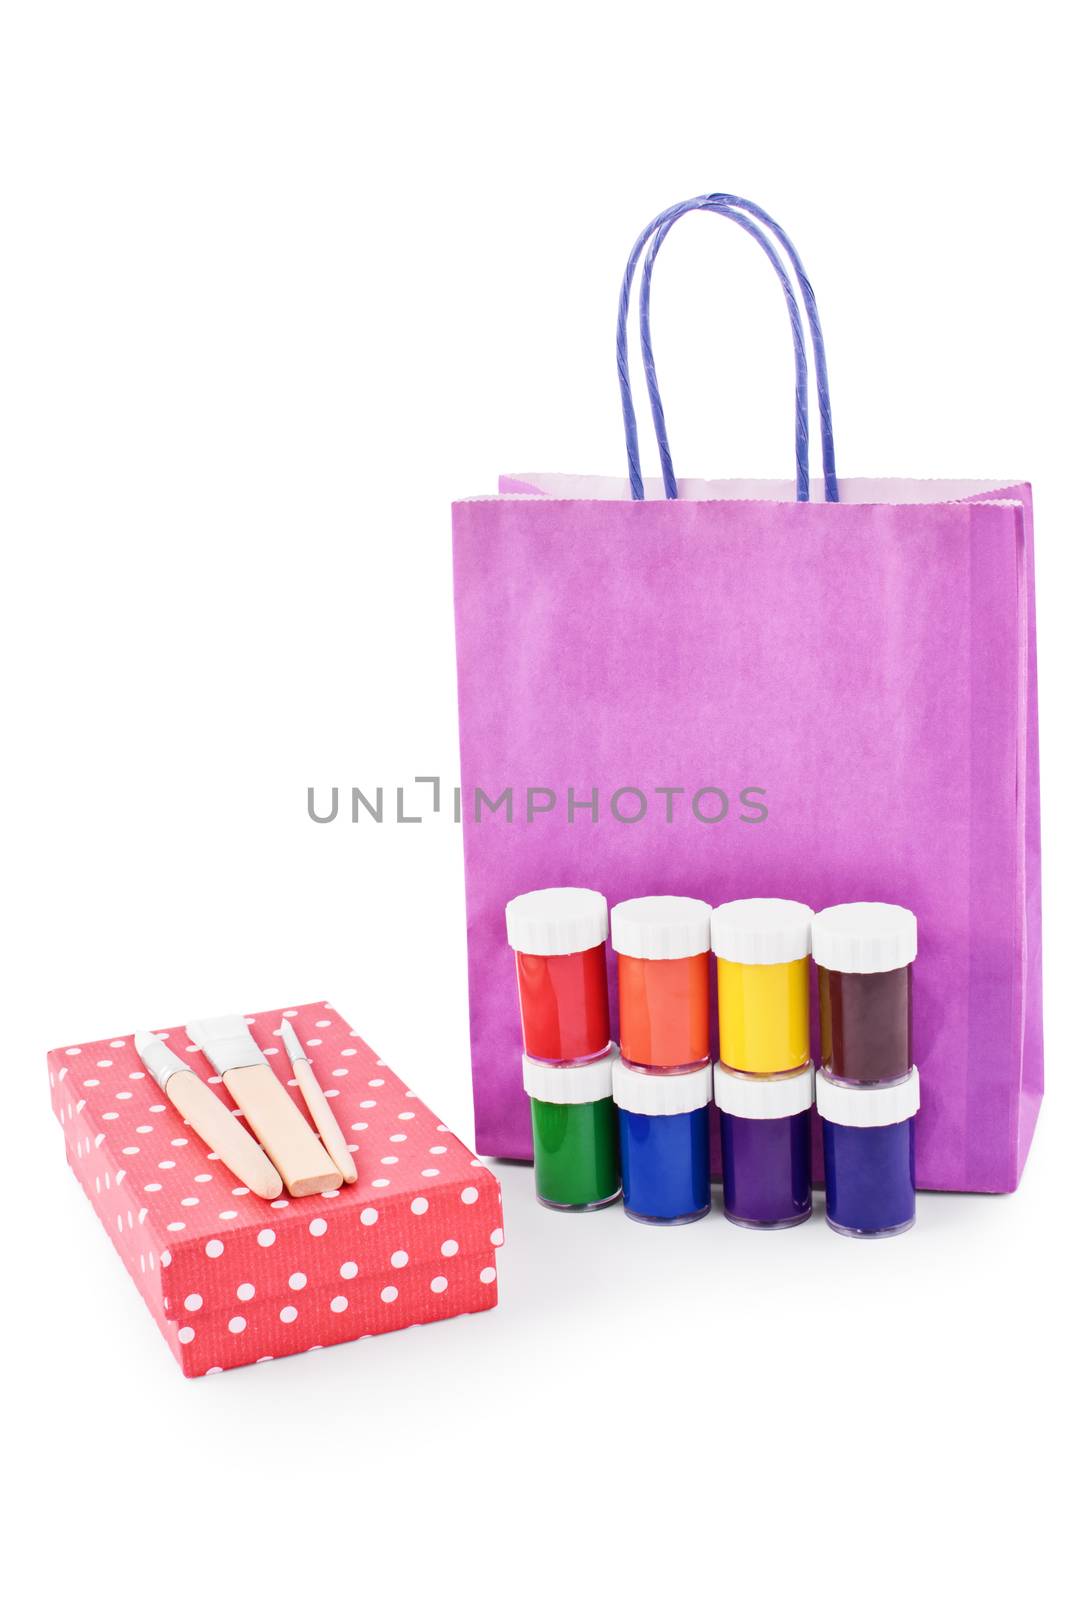 Paint brushes, paint vials, gift box and a gift bag isolated on white background.